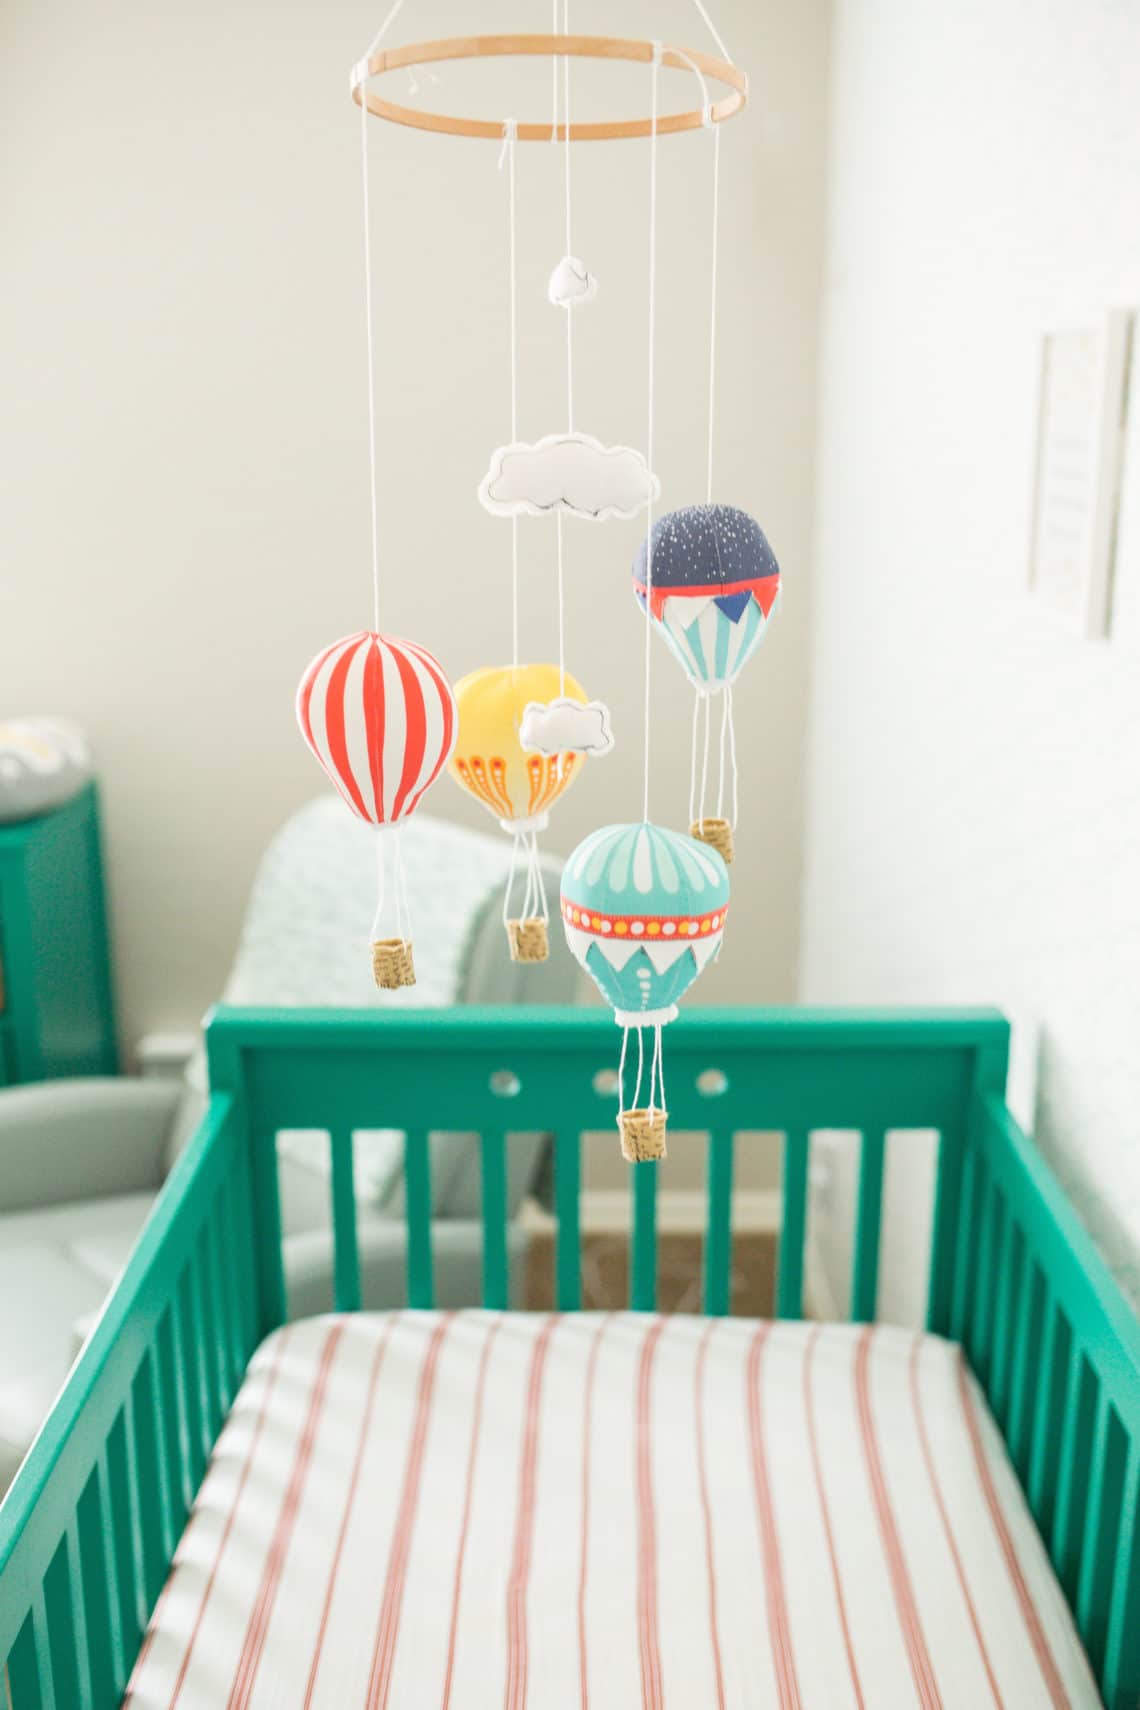 The Wonderful Things You Will Be Nursery Ideas and Room Reveal!